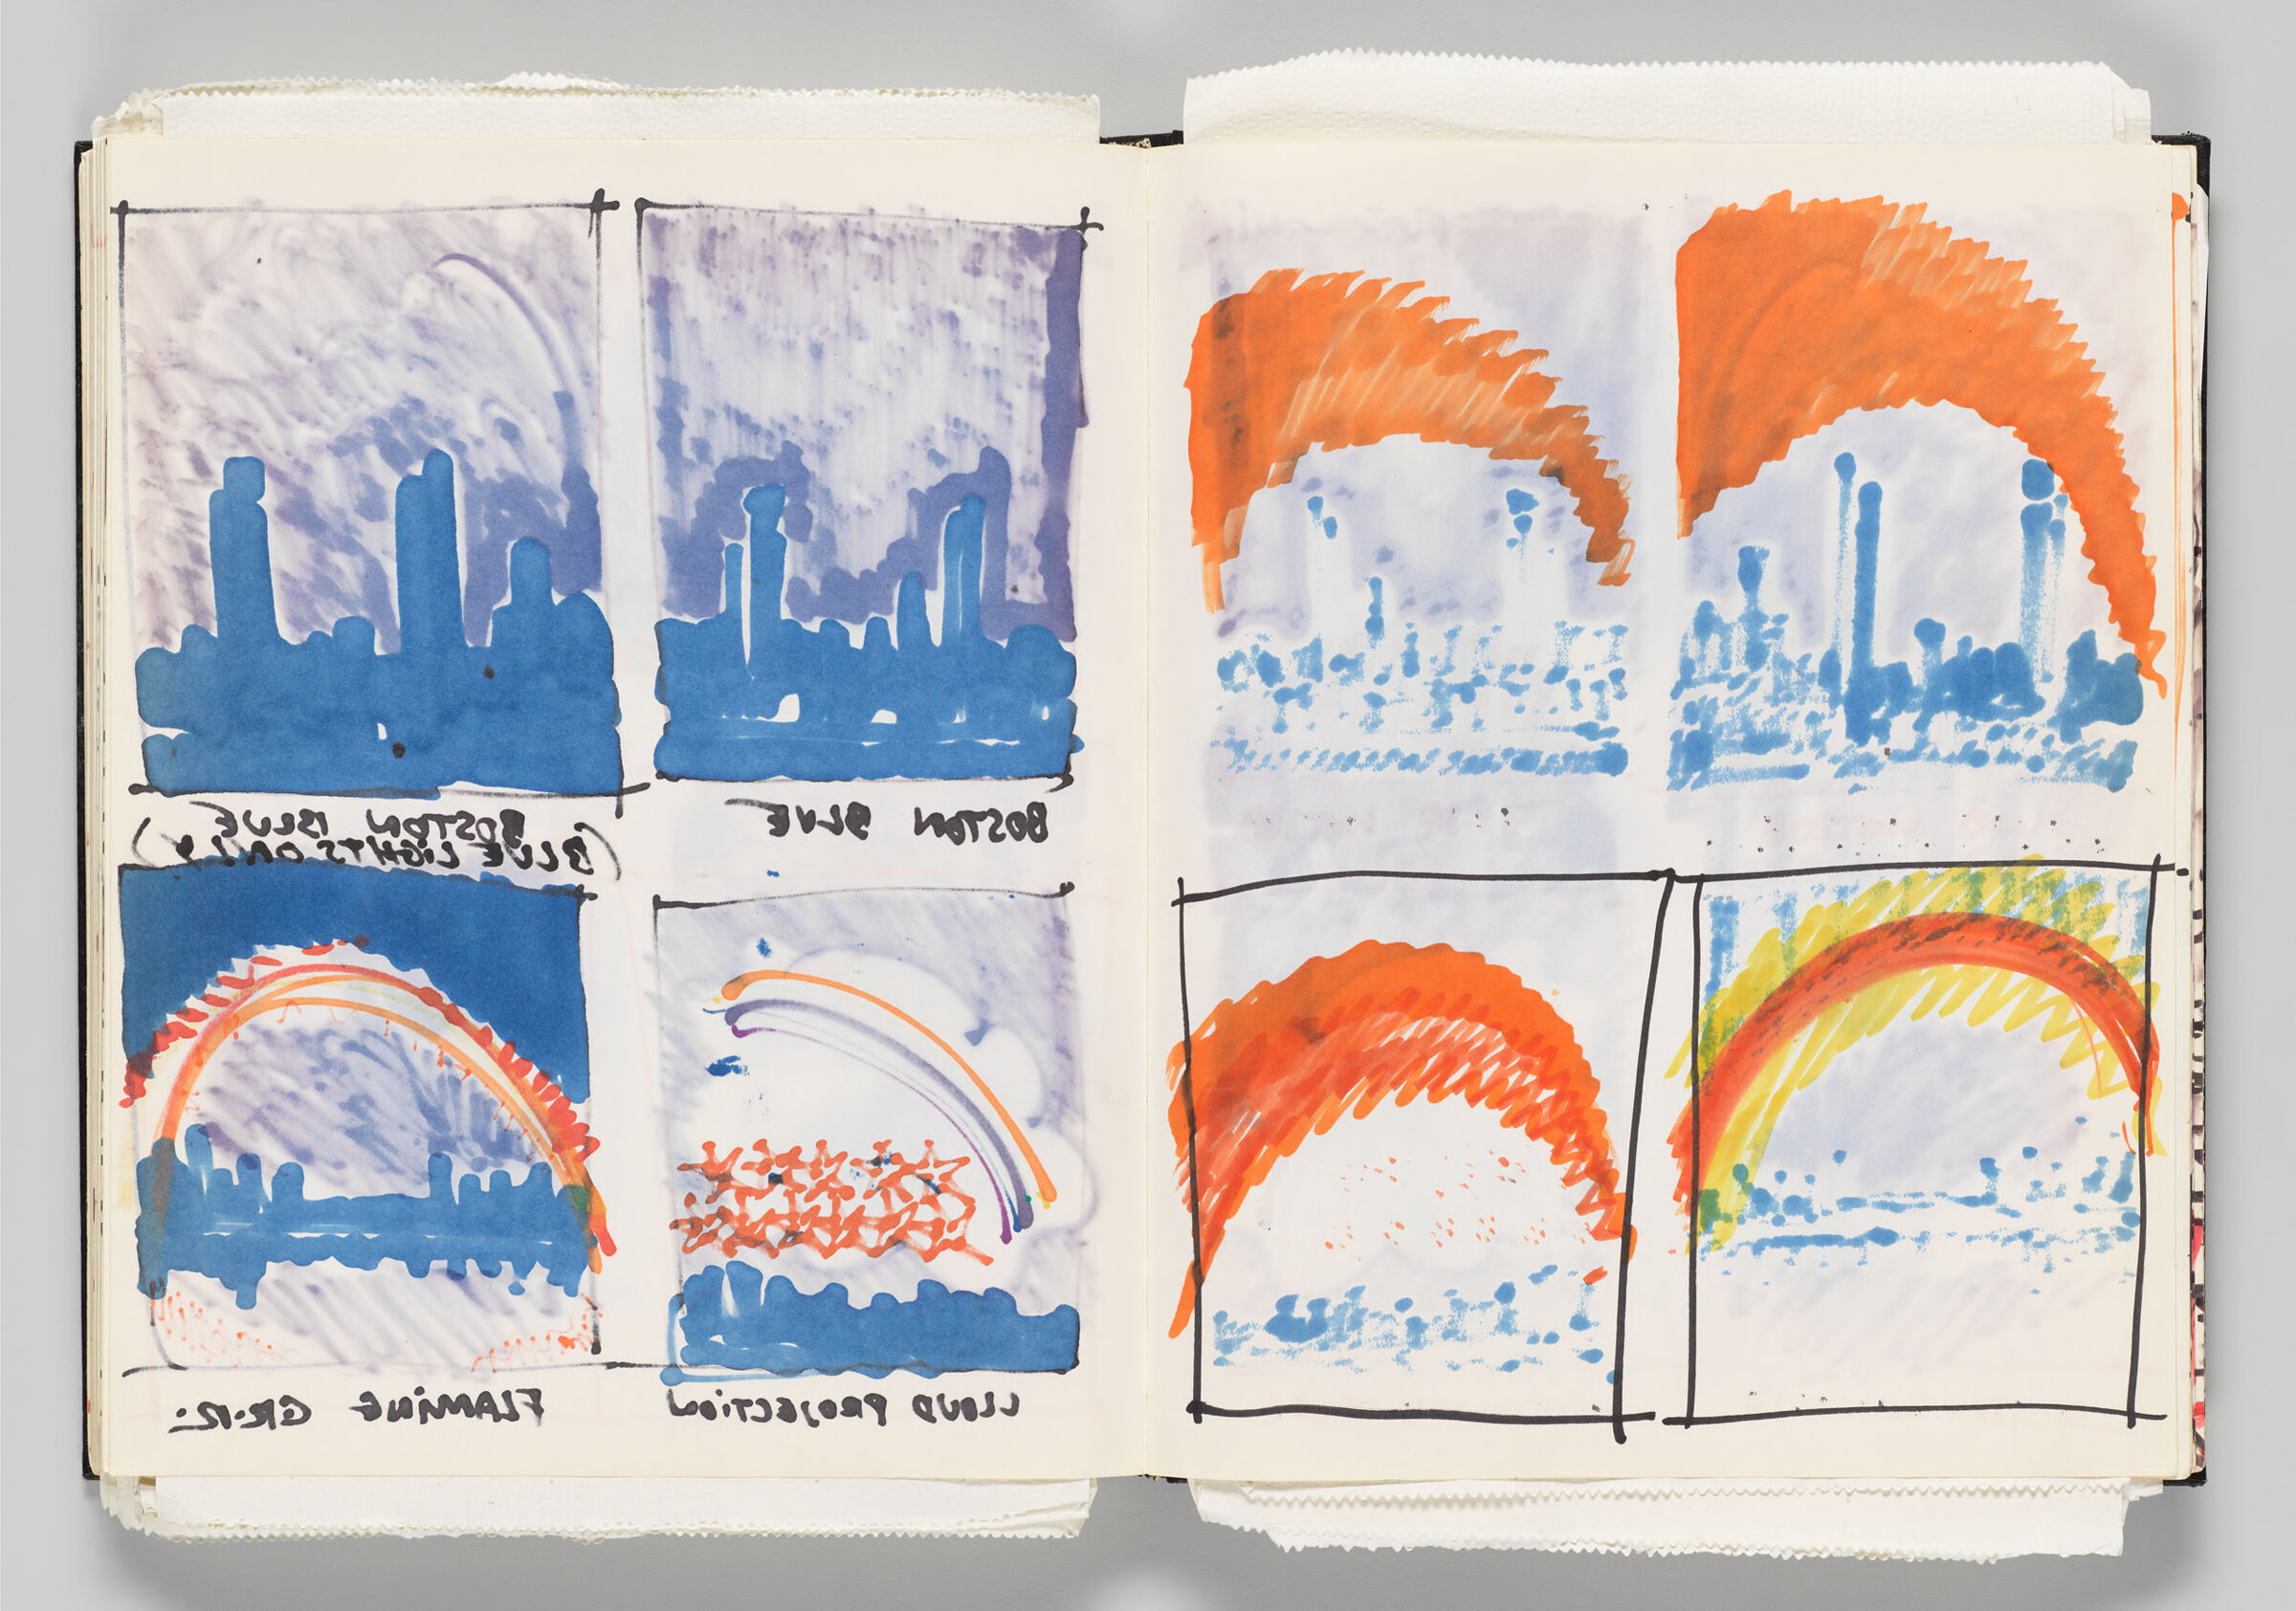 Untitled (Bleed-Through Of Previous Page, Left Page); Untitled (Jubilee Project Designs With Bleed-Through And Color Transfers, Right Page)